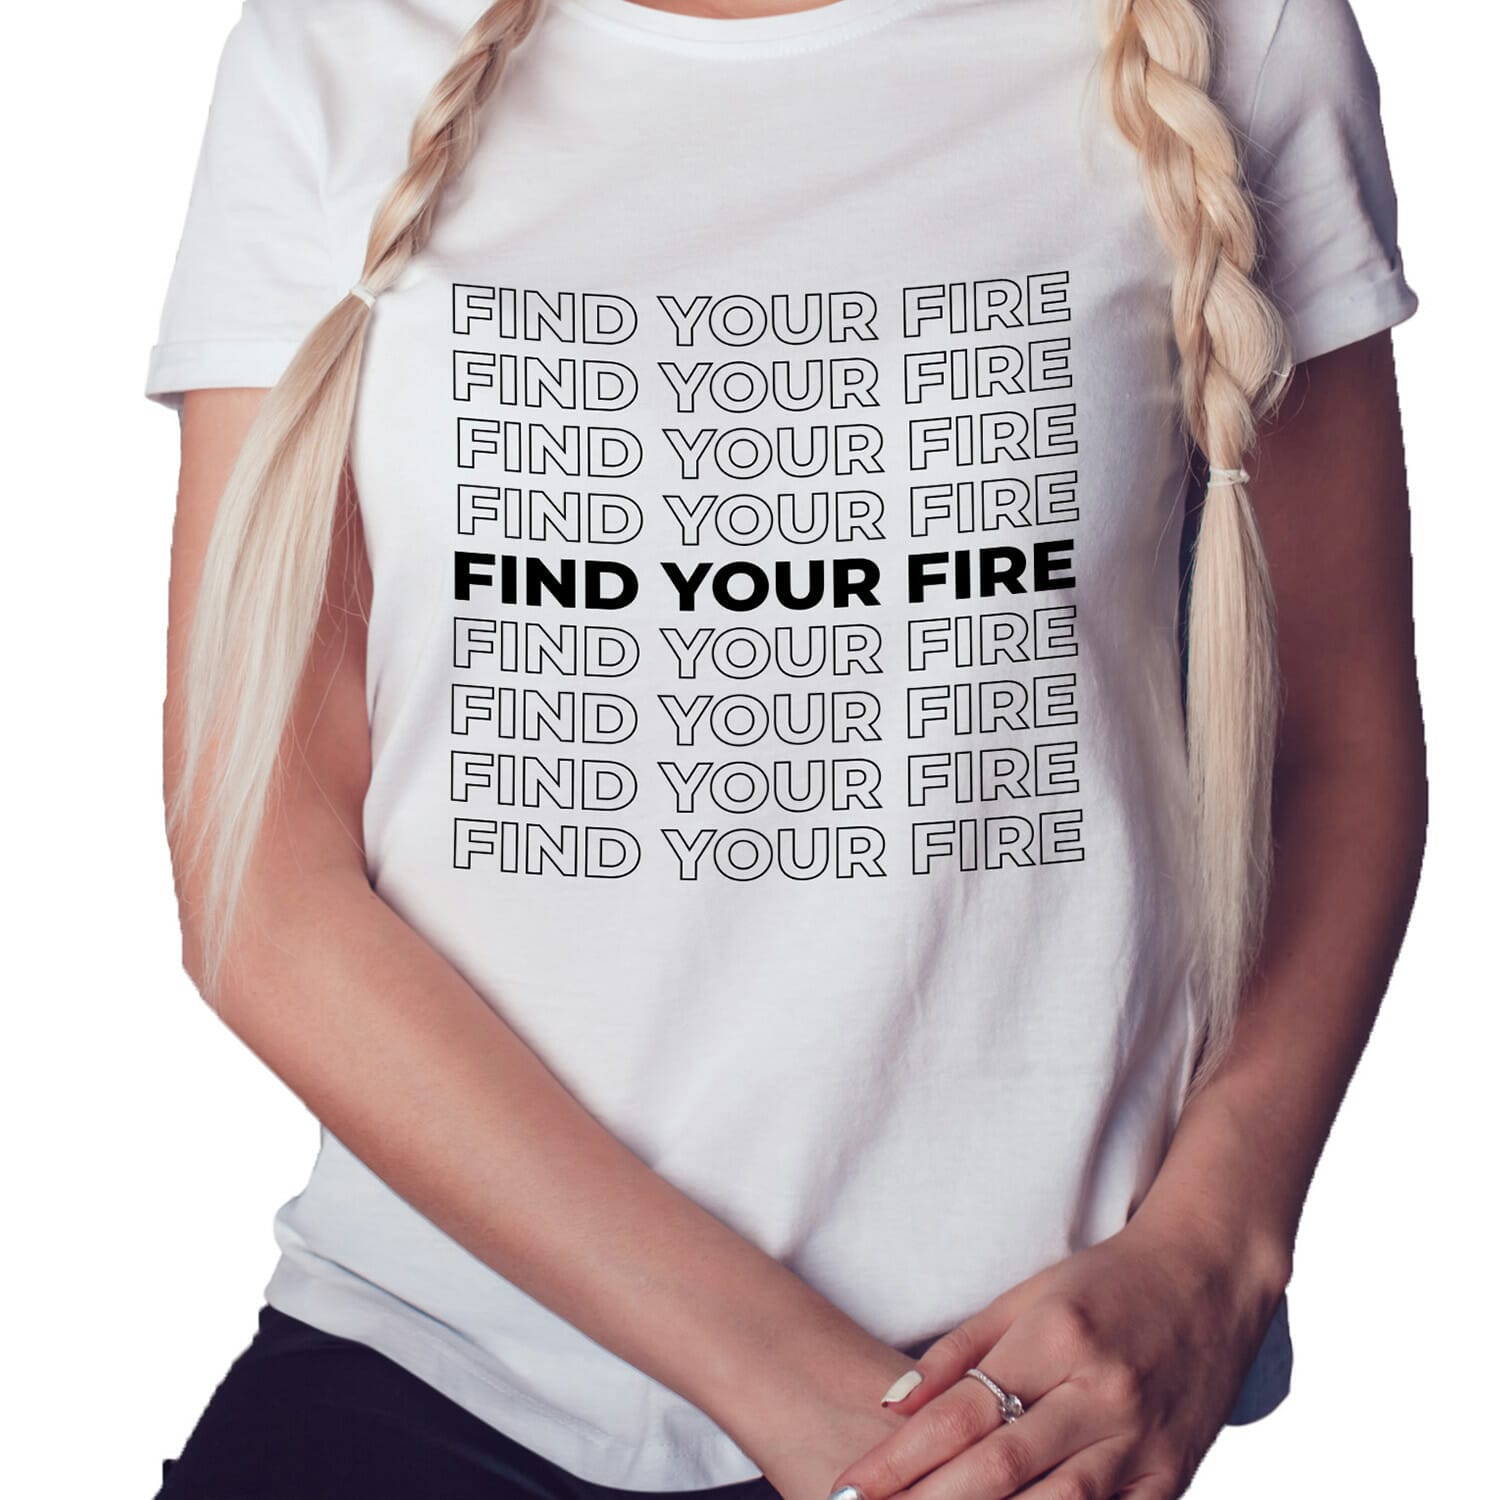 Find your fire t shirt design